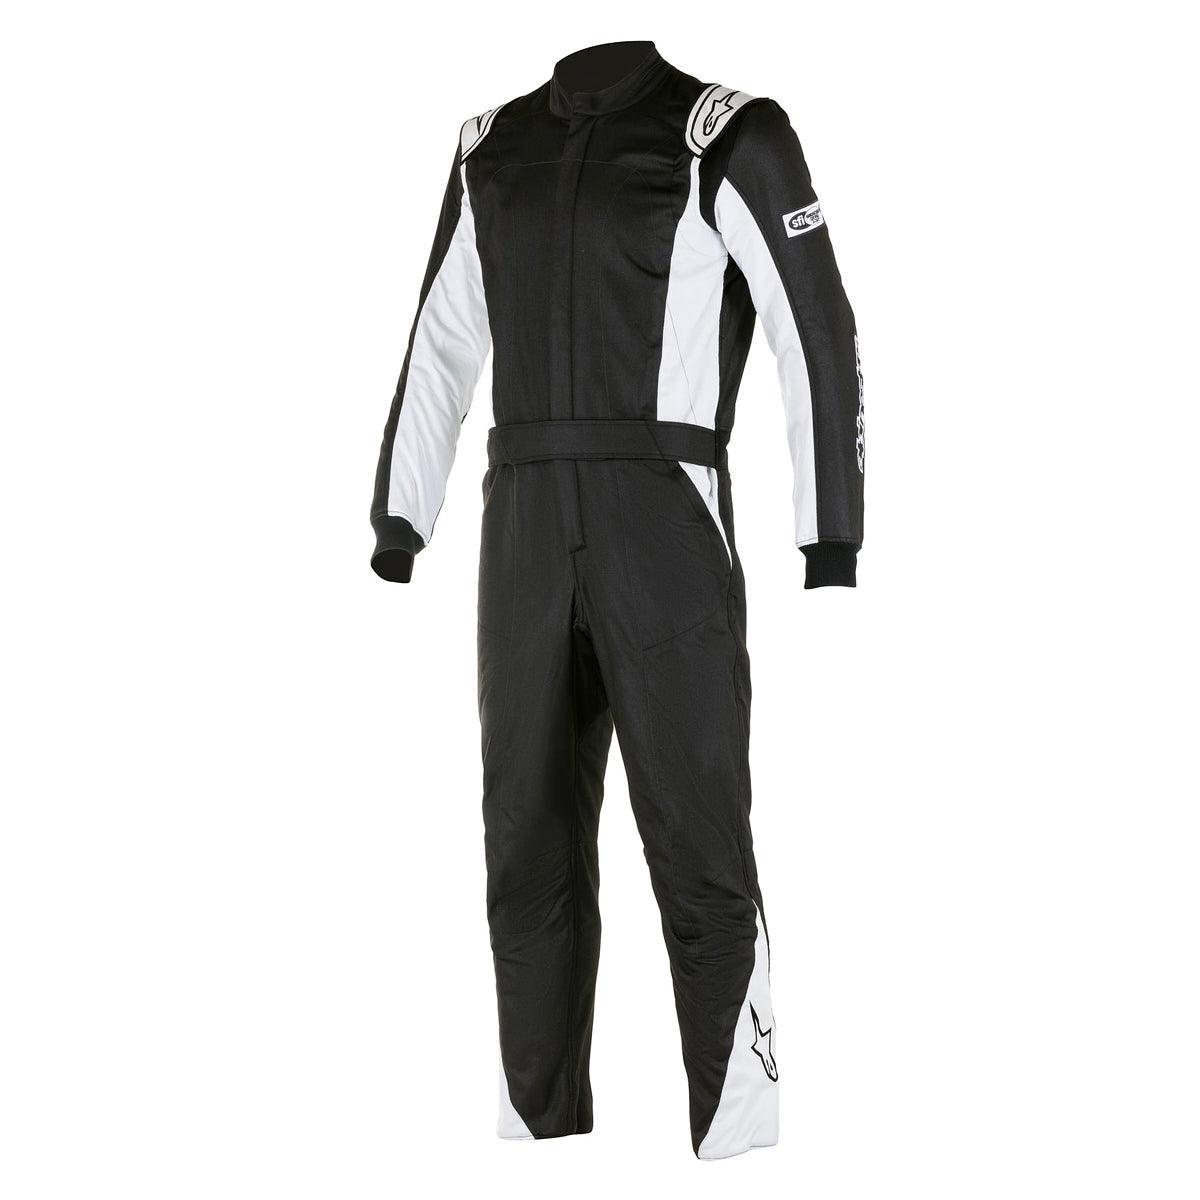 Suit Atom Black / Silver X-Small / Small - Burlile Performance Products